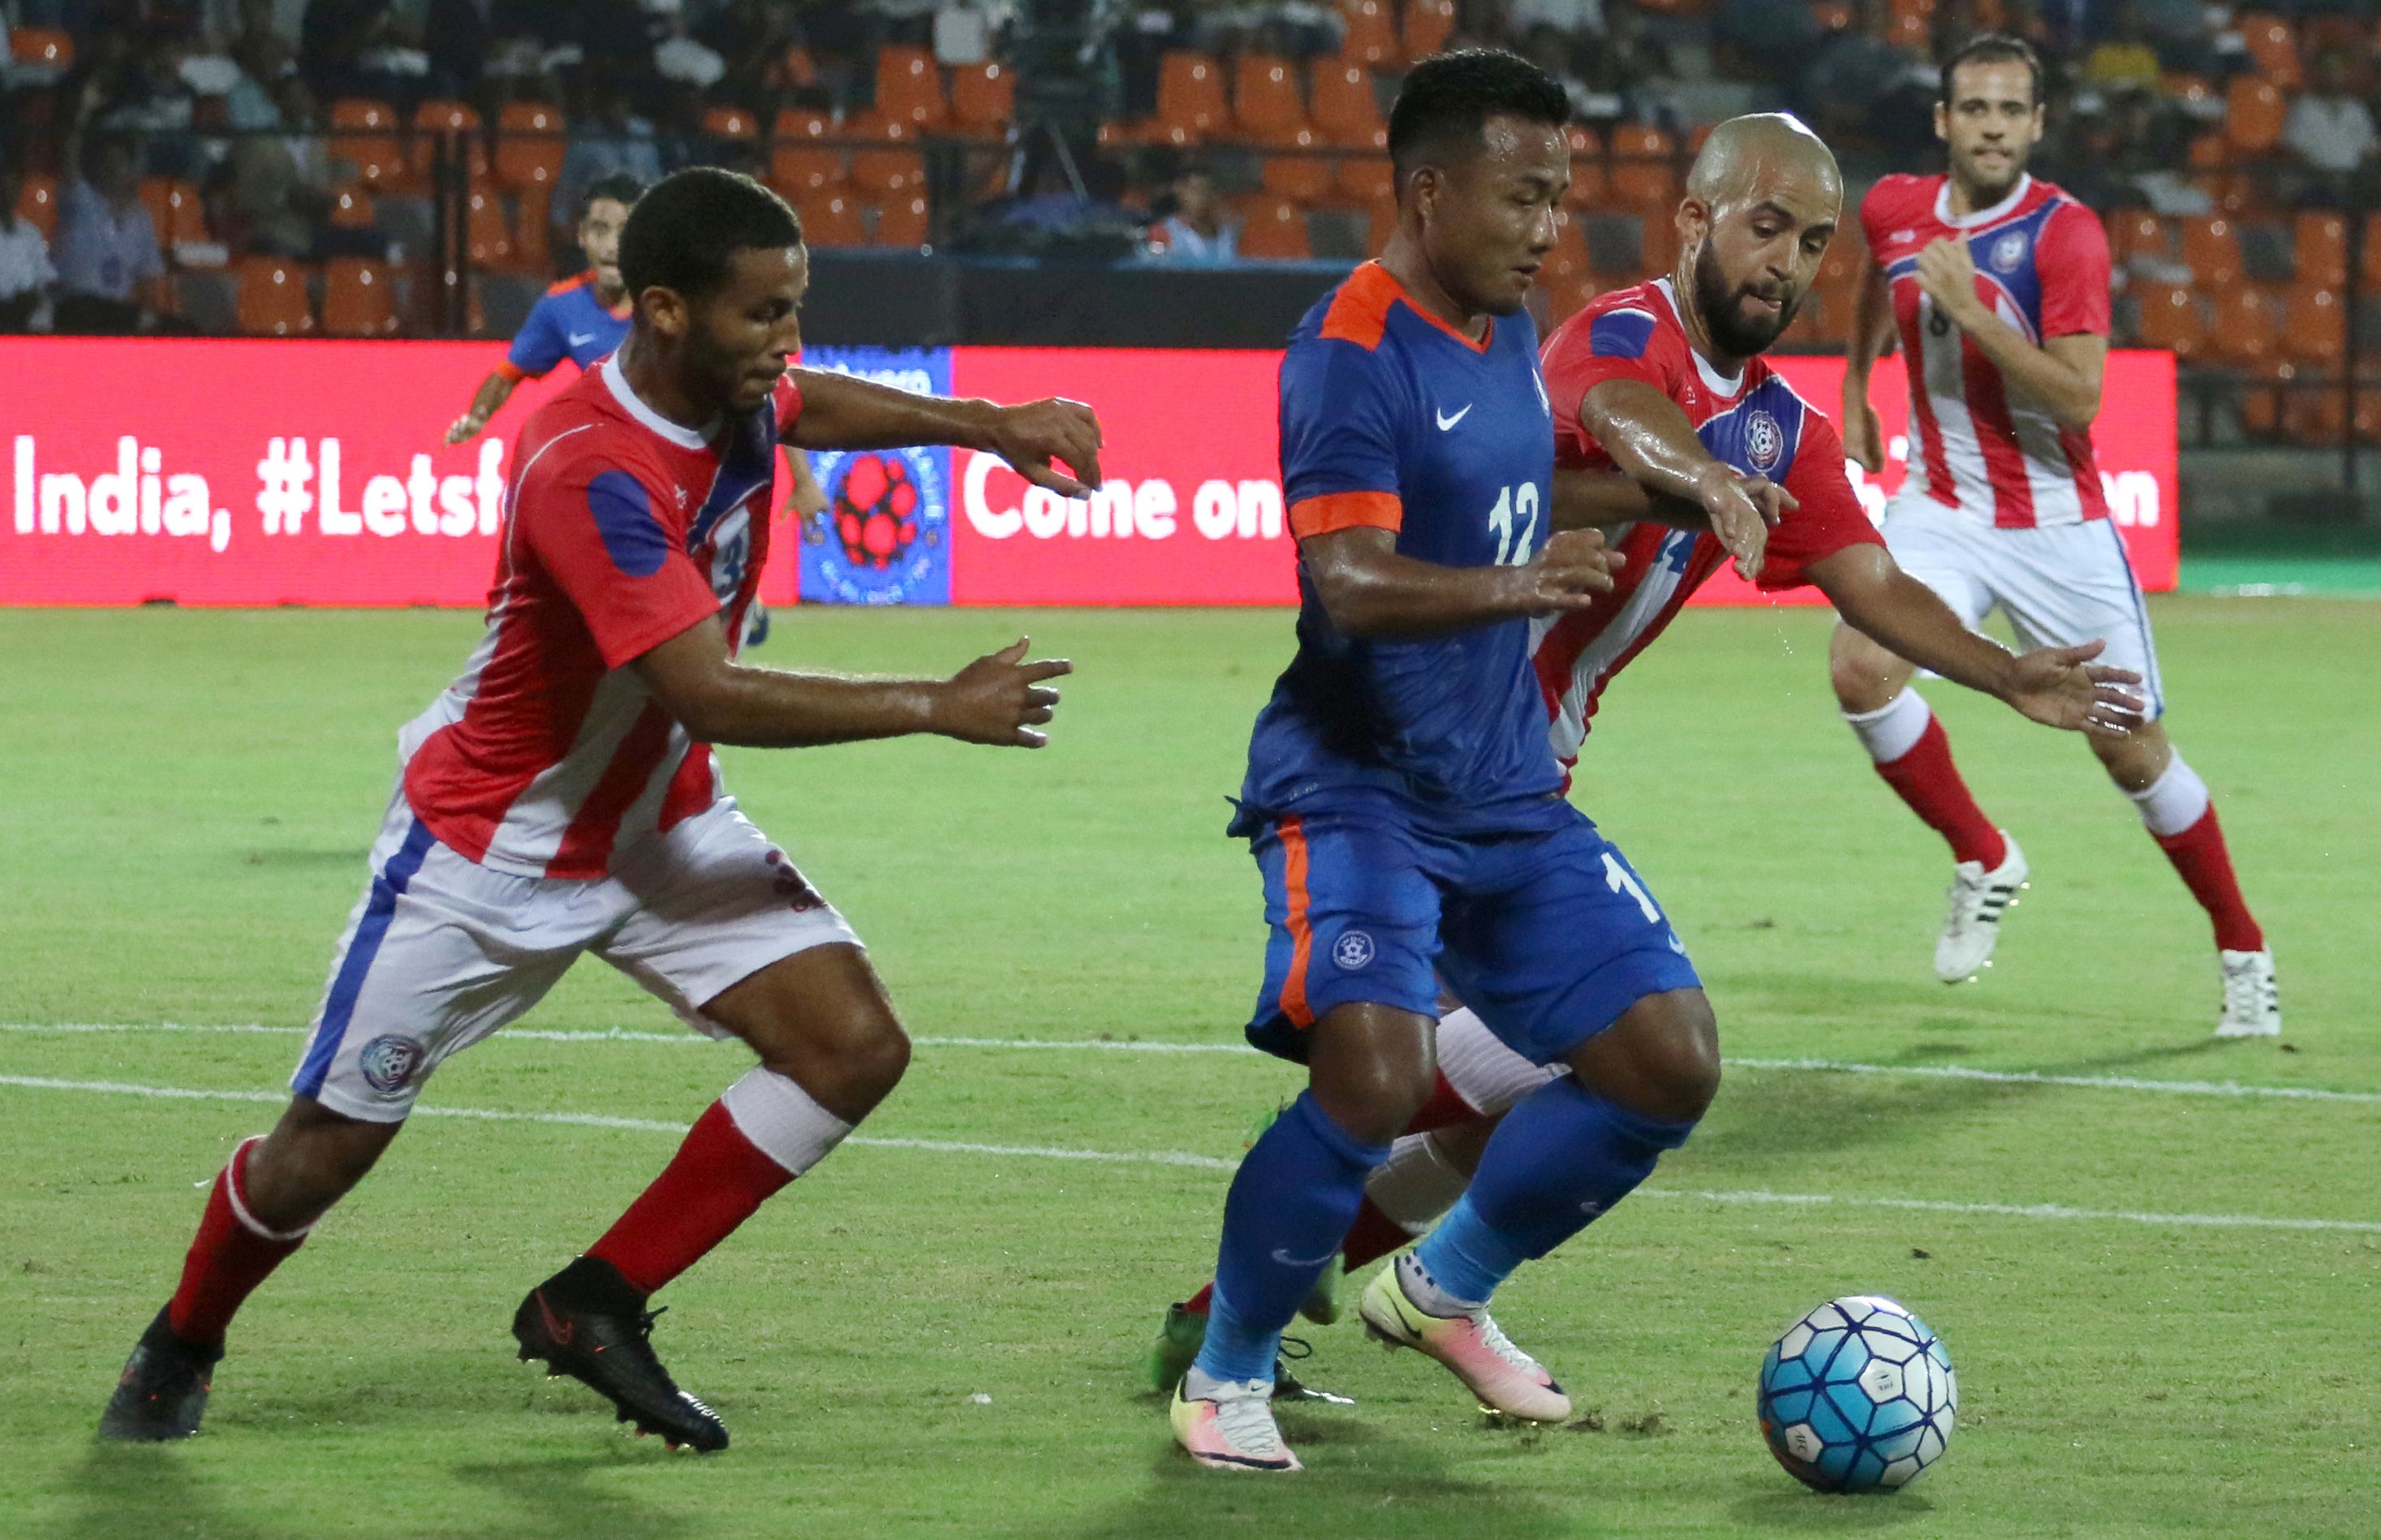 Jeje Lalpekhlua (2L)of India vies for the  ball with defenders from Puerto Rico during a friendly football match between India and Puerto Rico in Mumbai on September 3, 2016. / AFP / STR        (Photo credit should read STR/AFP/Getty Images)